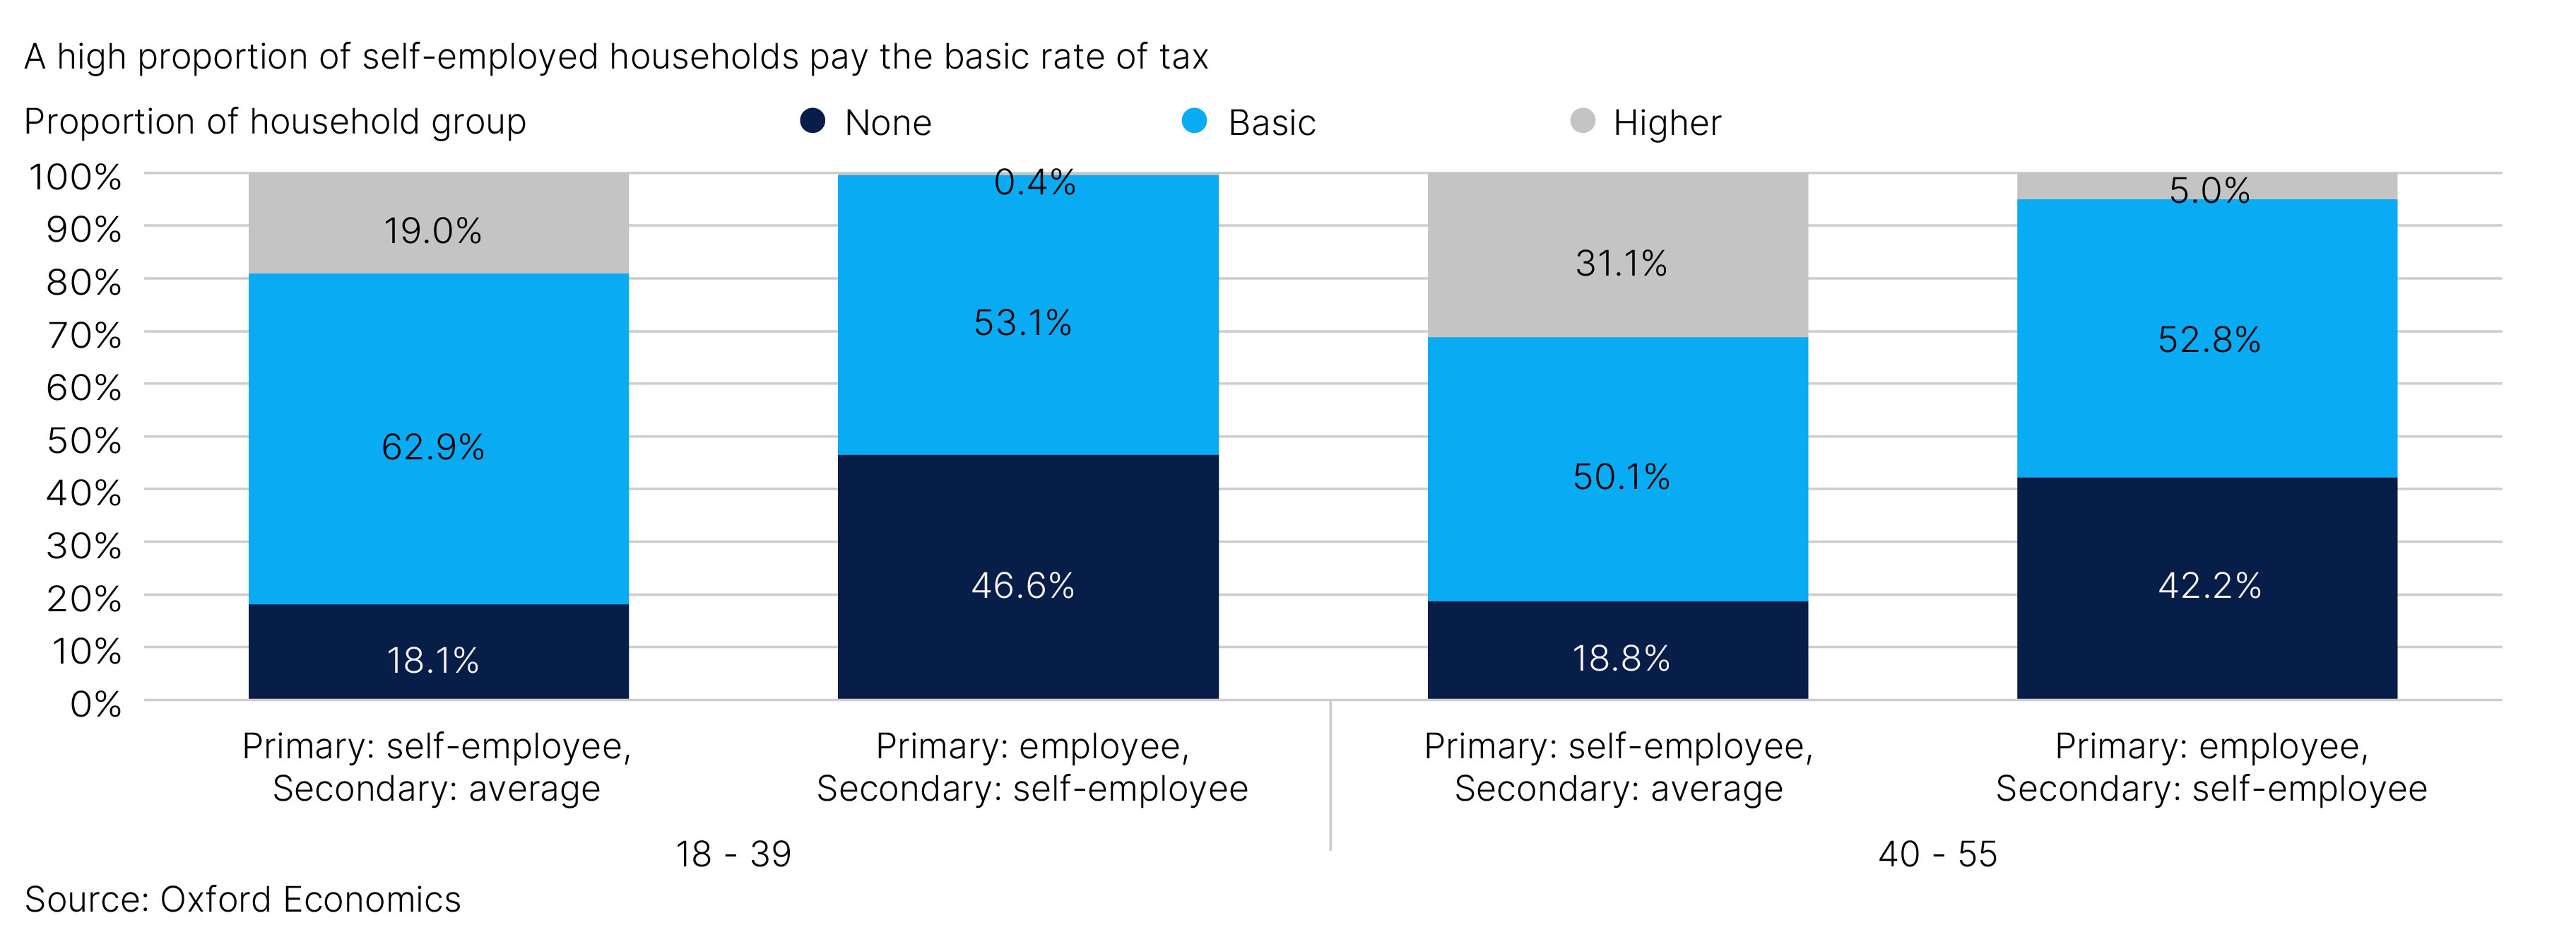 Fig. 10. A high proportion of self-employed households pay the basic rate of tax